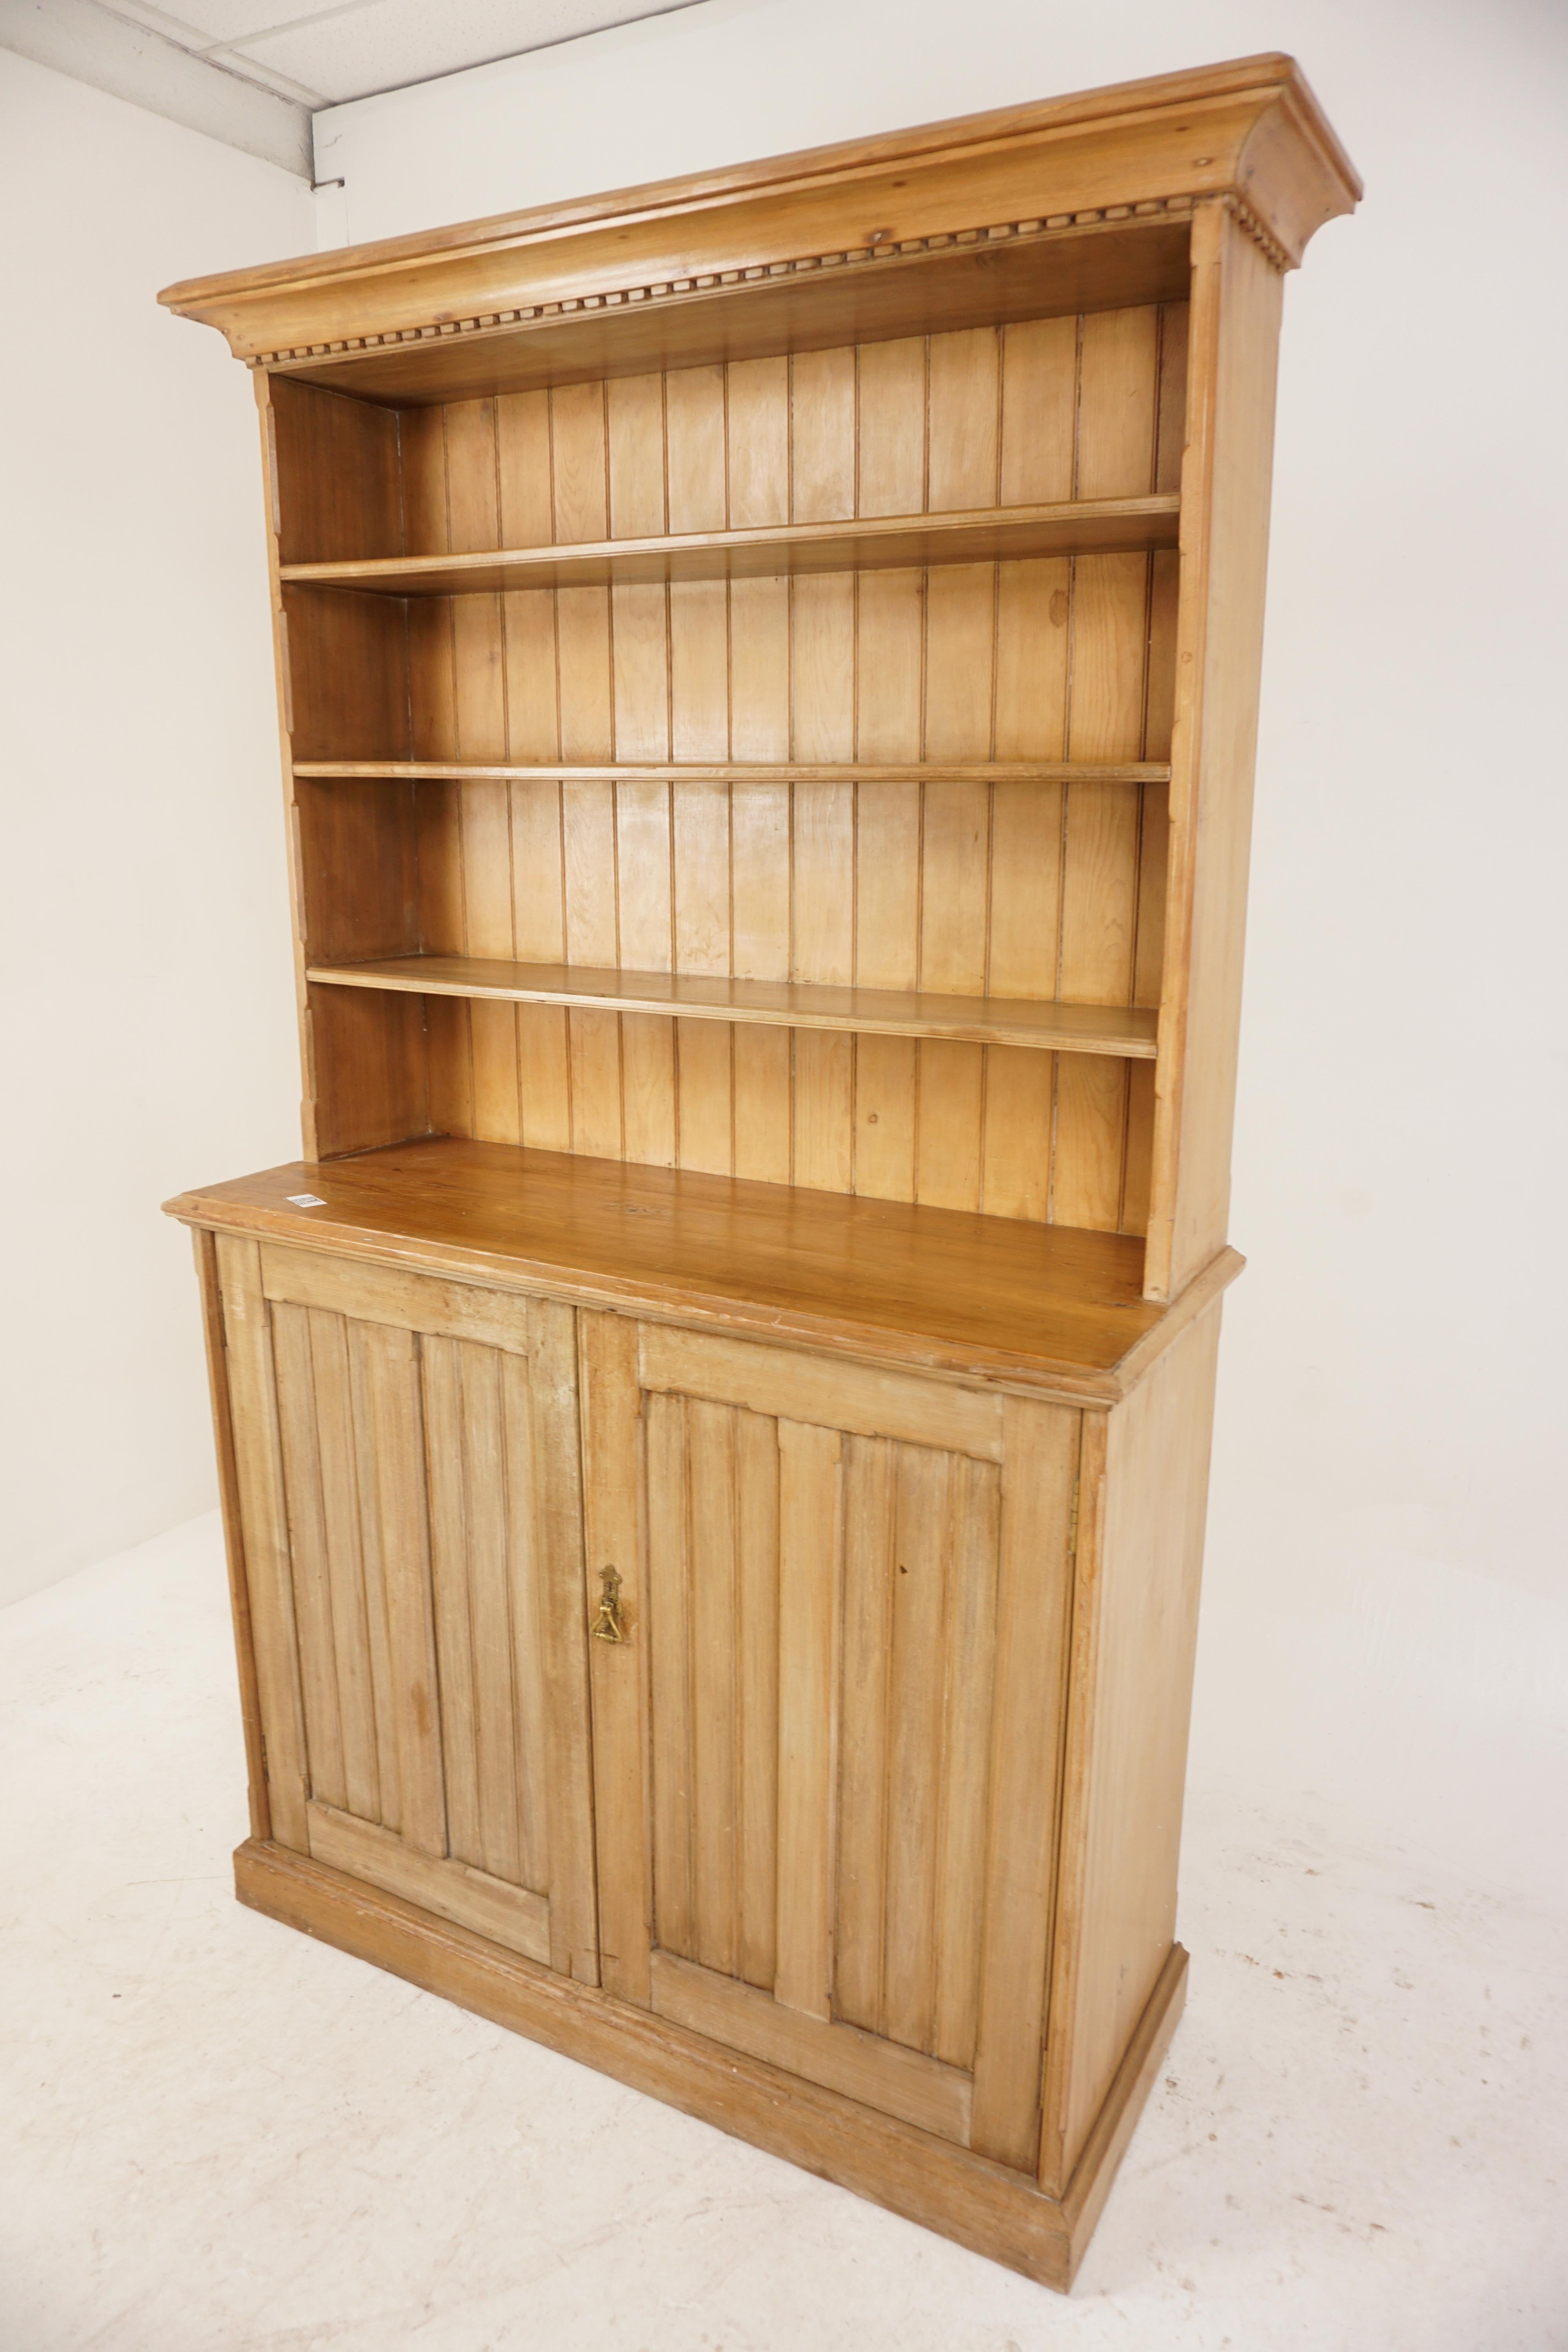 Antique Pine Cabinet, Victorian Farm House Kitchen Cabinet Pantry, Housekeepers Cabinet, Scotland 1870, Antique Furniture, H954

Scotland 1870
Solid Pine
Original Finish
Dentil Frieze Below
Three Fixed Shelves 
Below this, the Base has Two